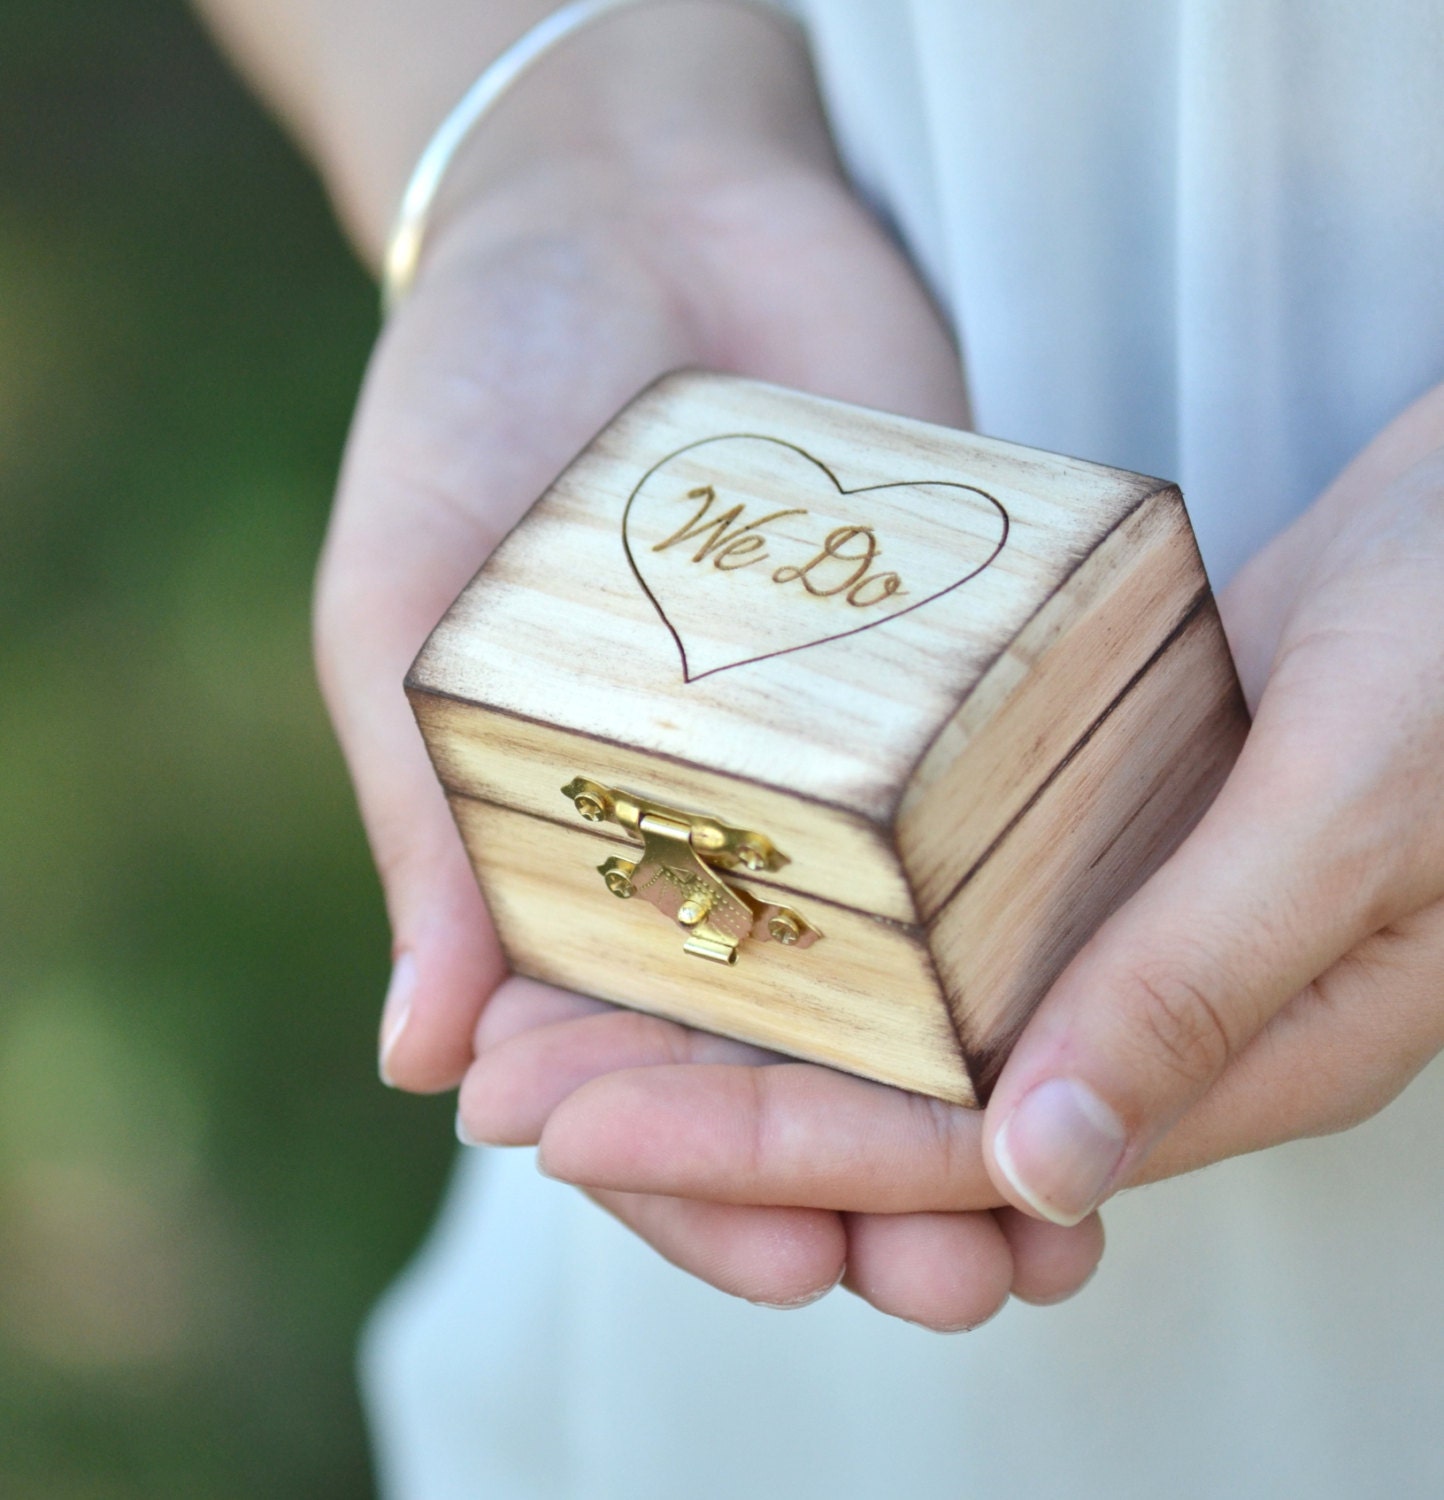 We Do wooden ring bearer box personalized wedding ring box